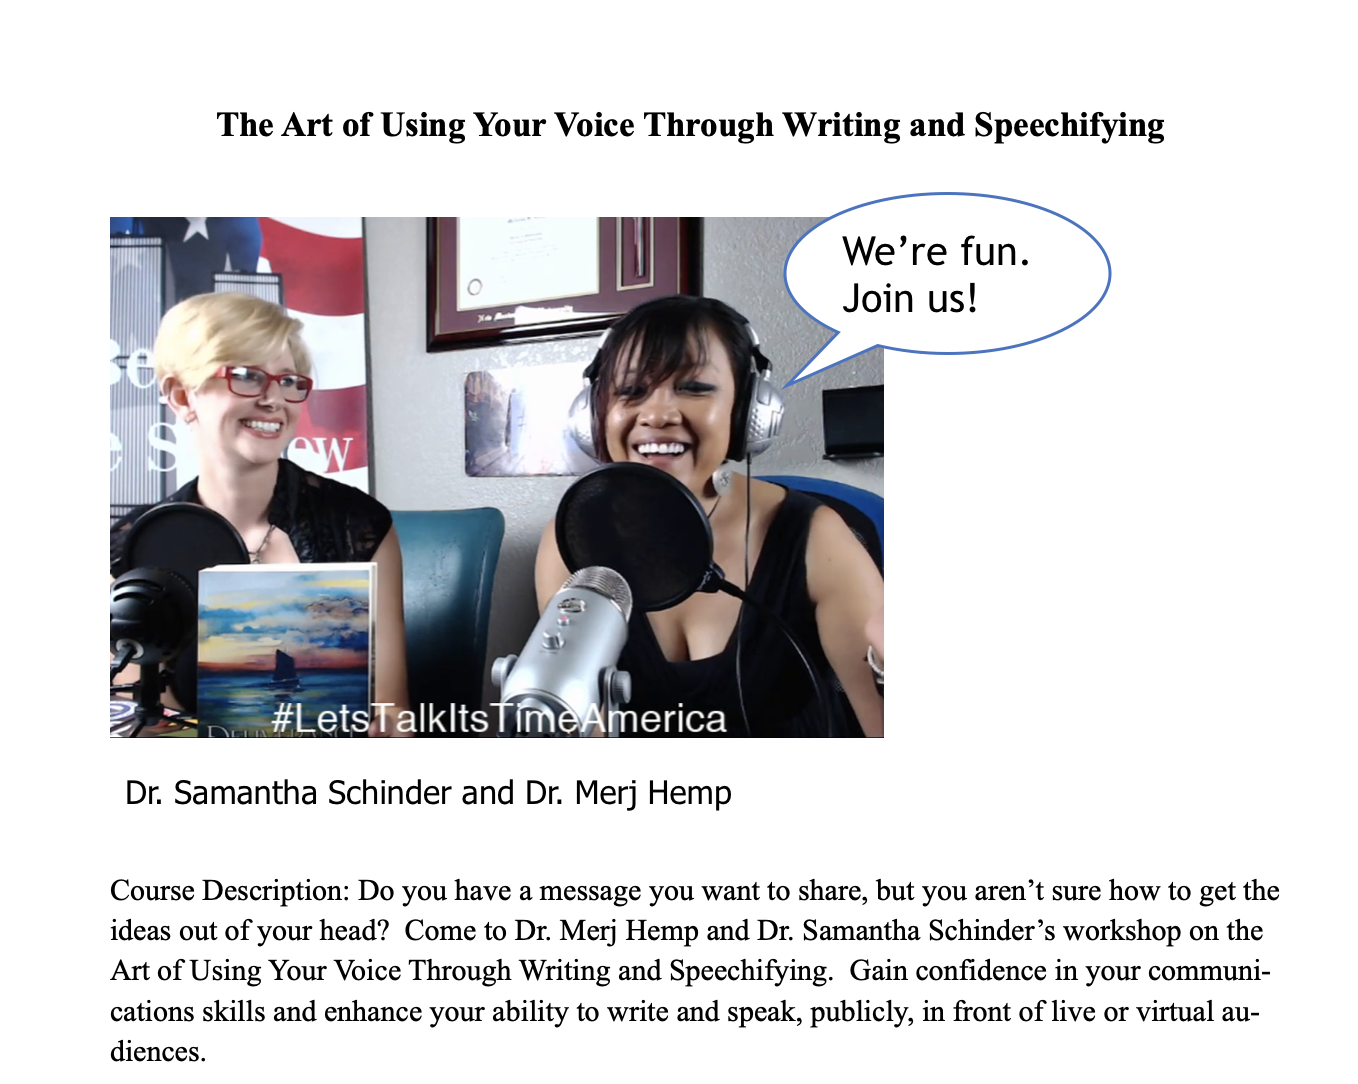 The Art of Using Your Voice Through Writing and Speechifying